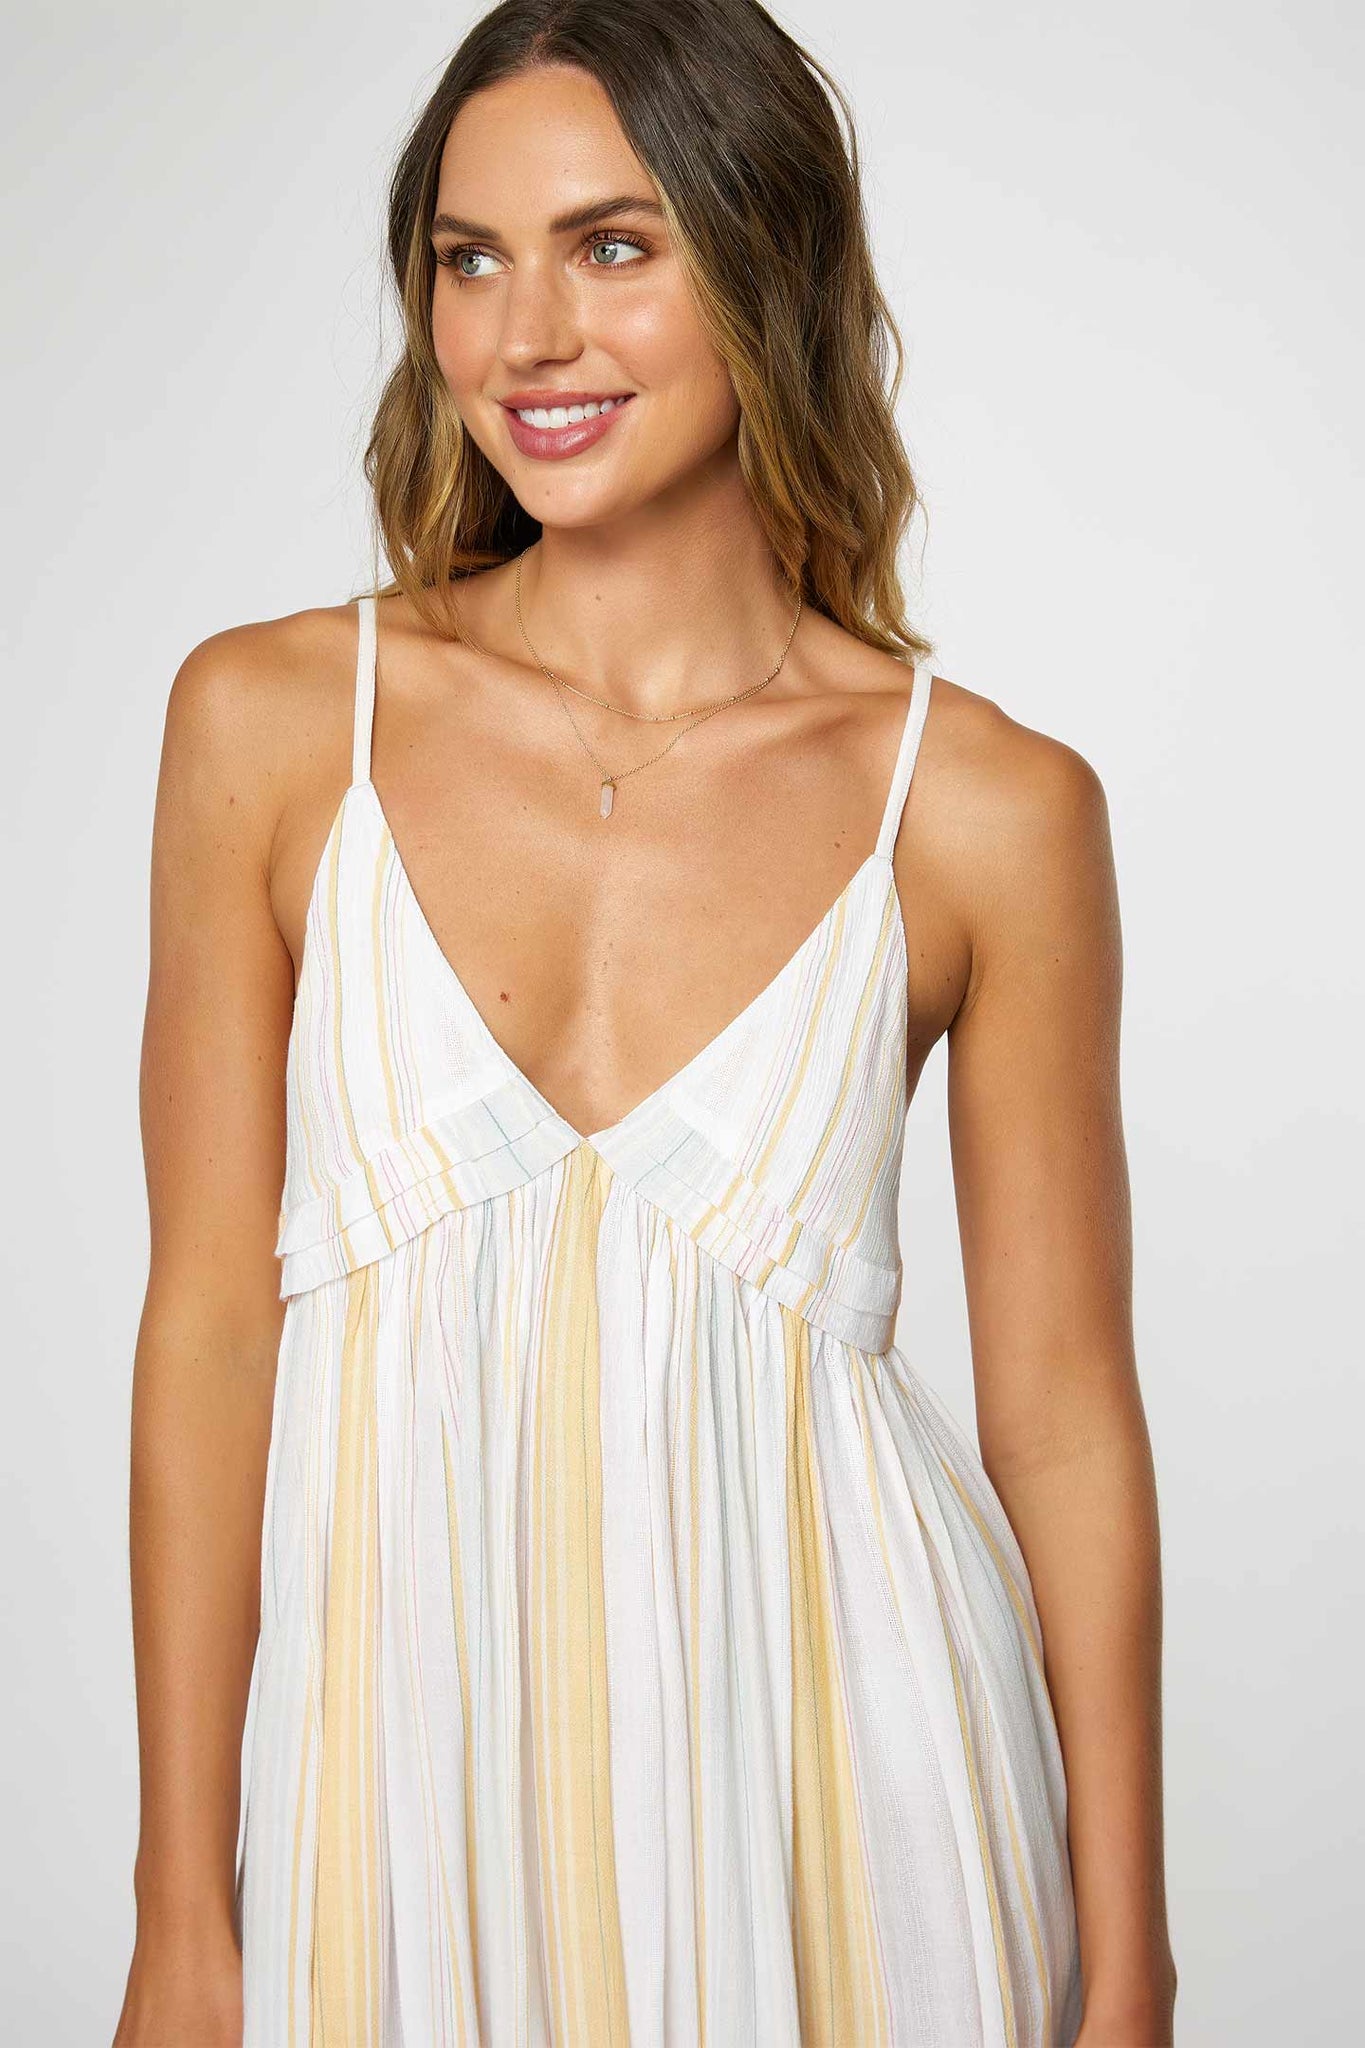 SALTWATER SOLIDS STRIPE TANK DRESS COVER-UP